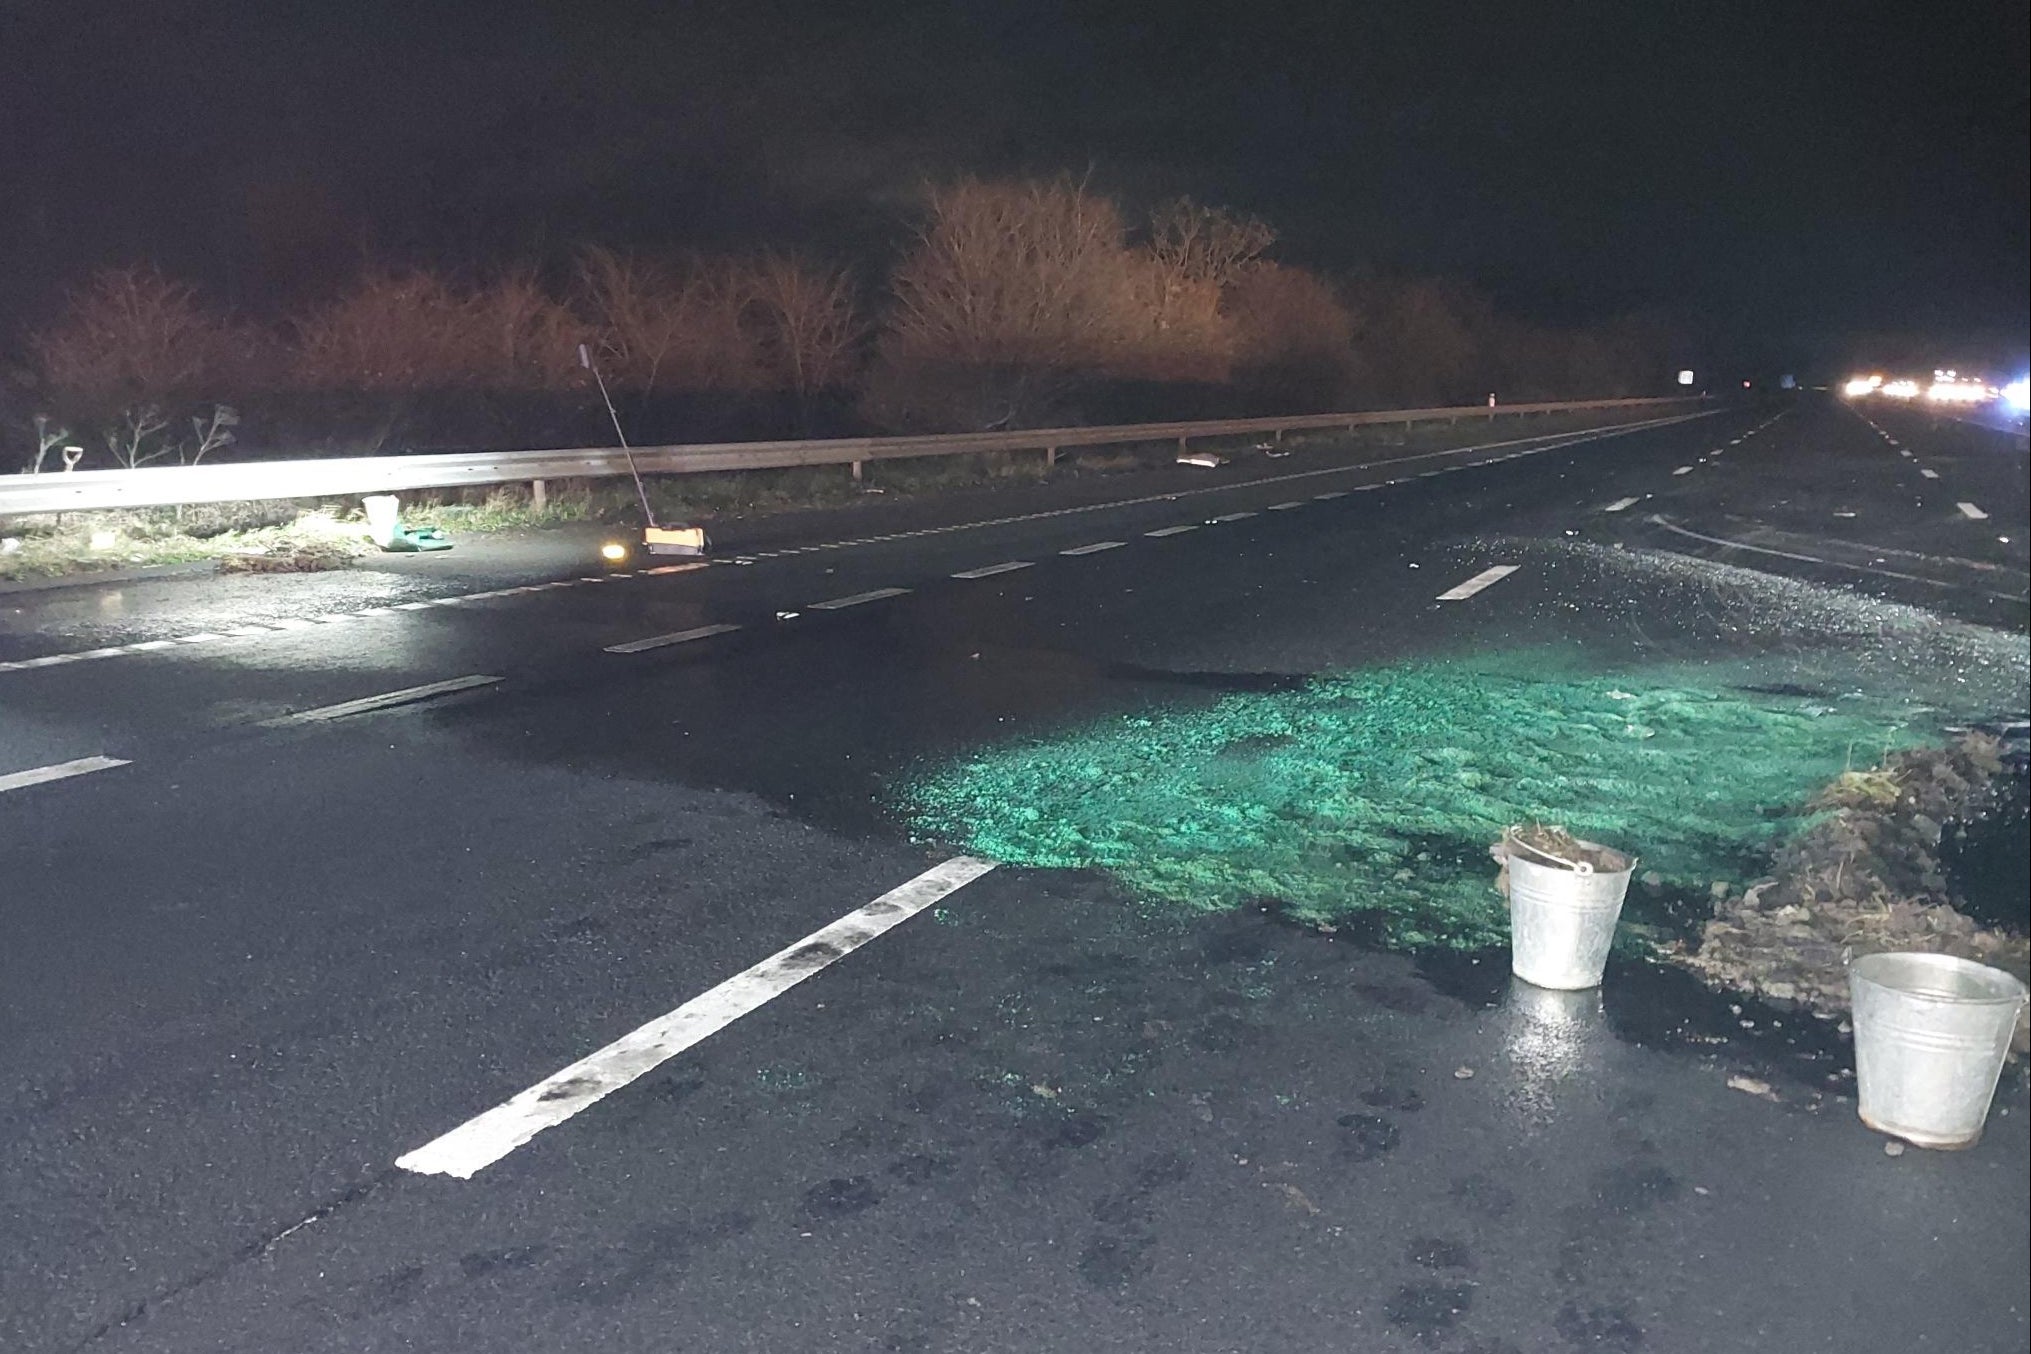 The HGV’s fuel tank has ruptured and has spilled out onto the carriageway